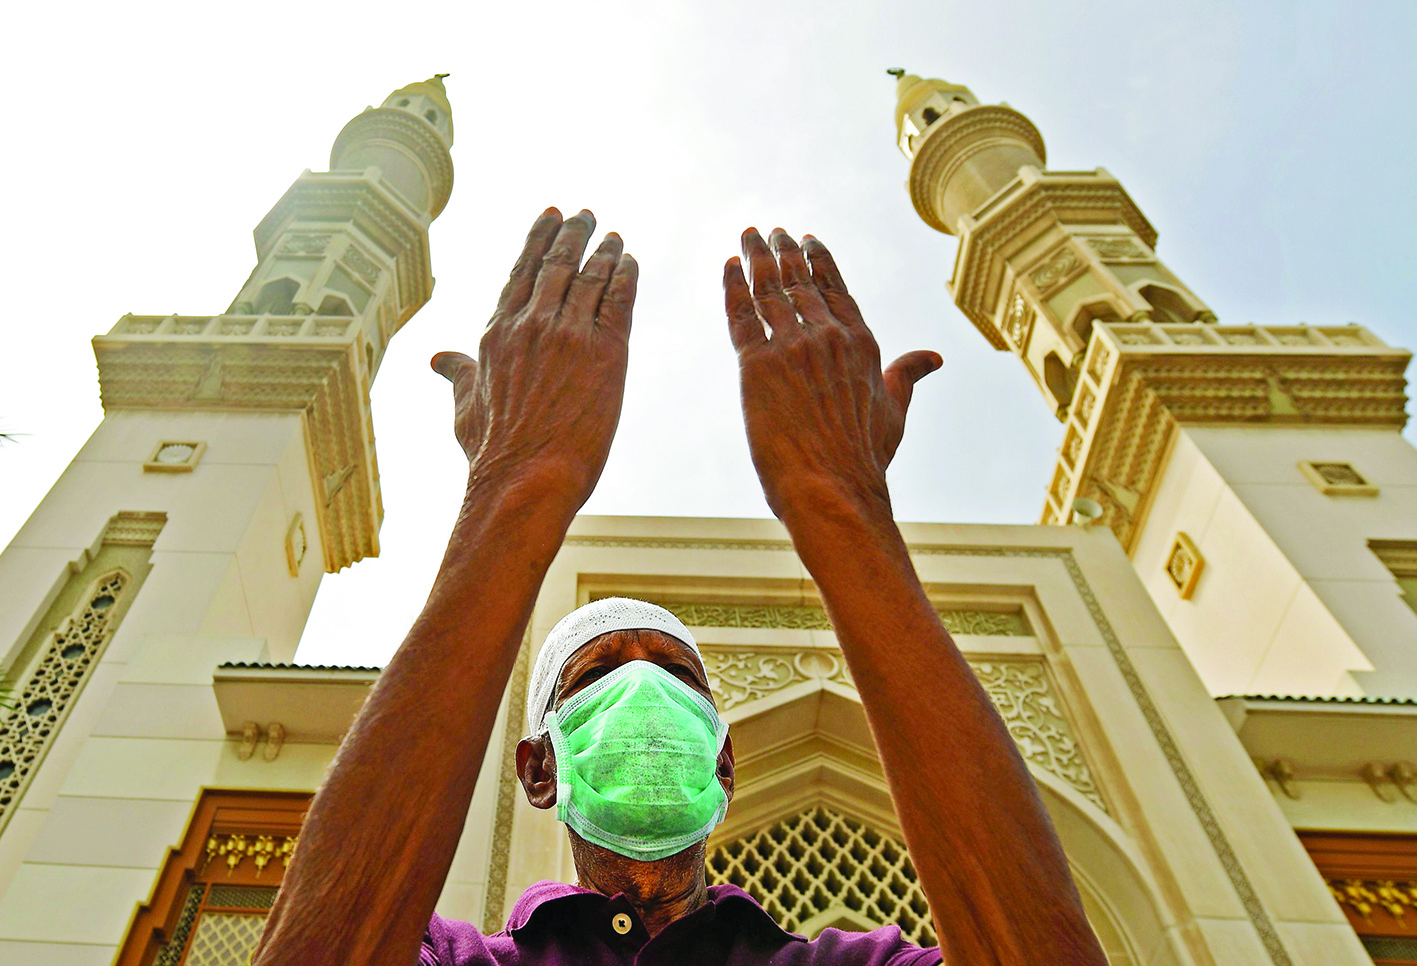 An elderly man wearing a protective mask lifts his hands in prayer outside a mosque which has been closed to worshipers amid the COVID-19 coronavirus pandemic, in Sharjah, in the United Arab Emirates, on March 30, 2020. (Photo by KARIM SAHIB / AFP)